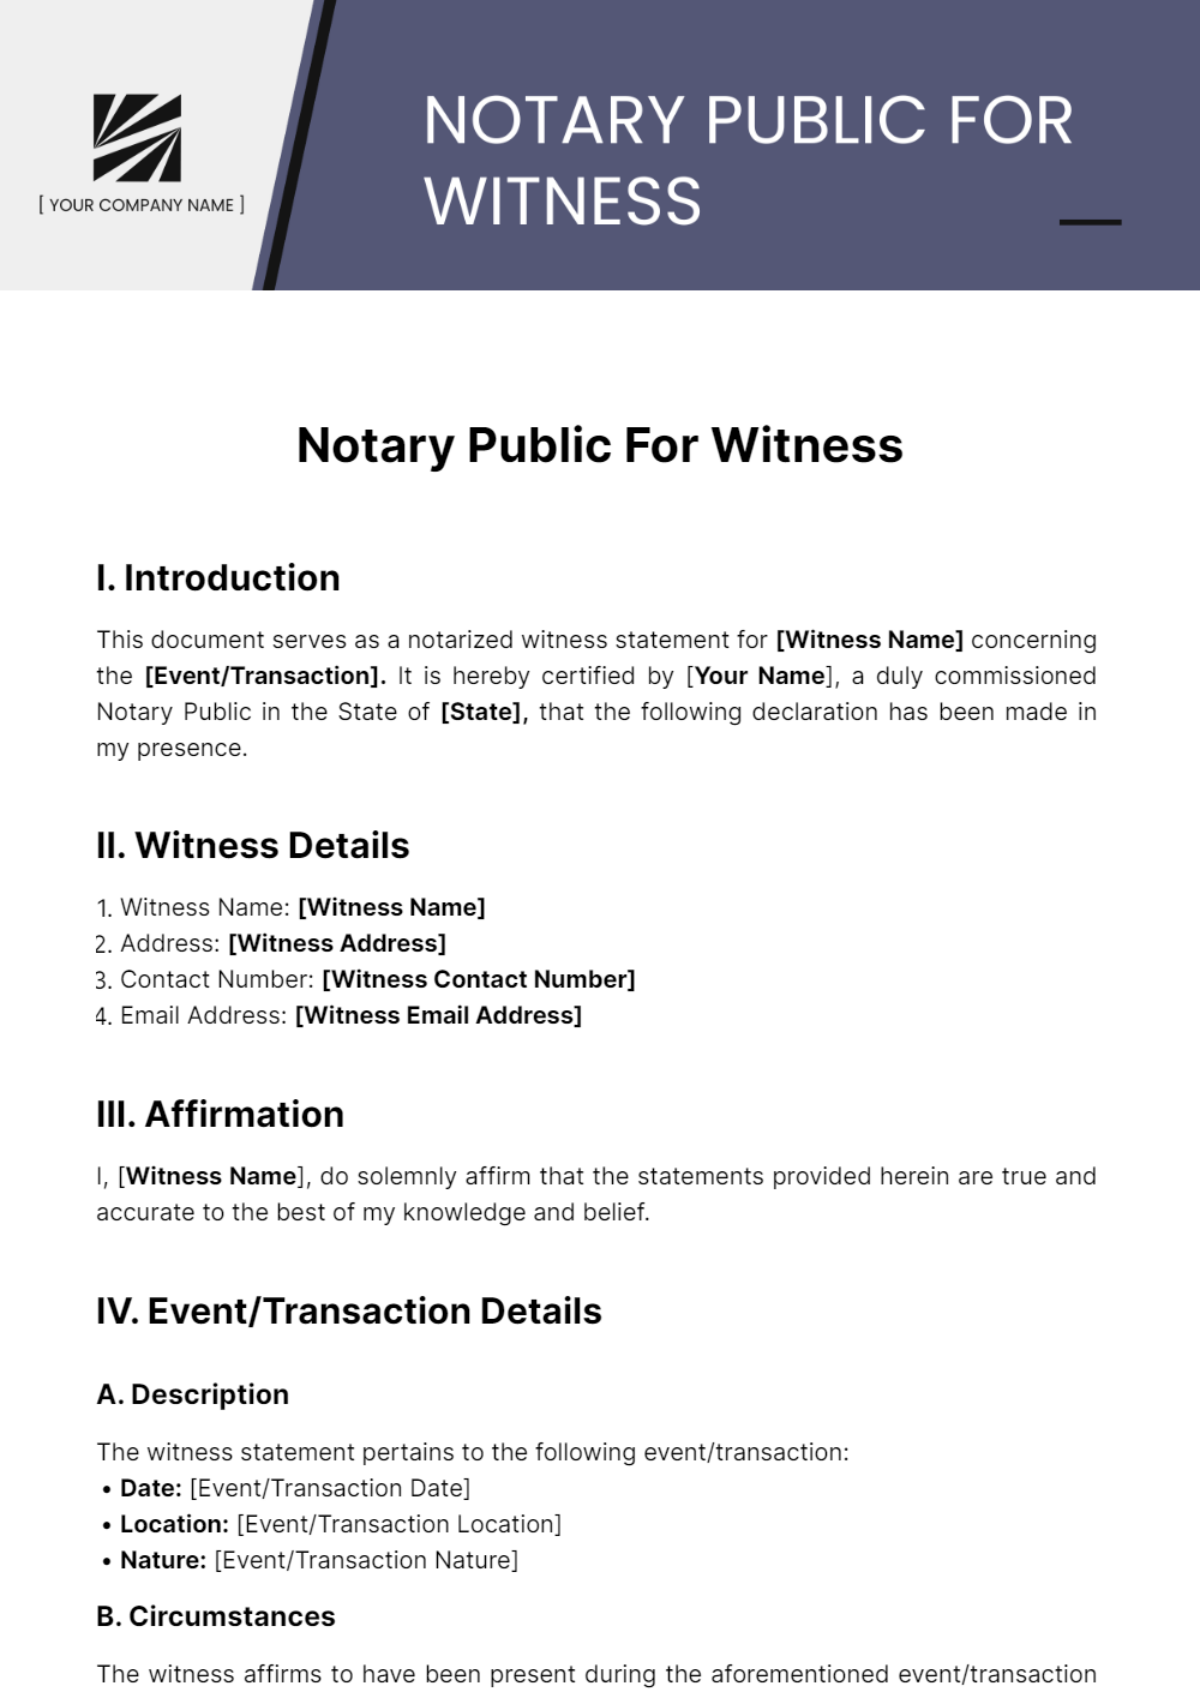 Free Notary Public For Witness Template